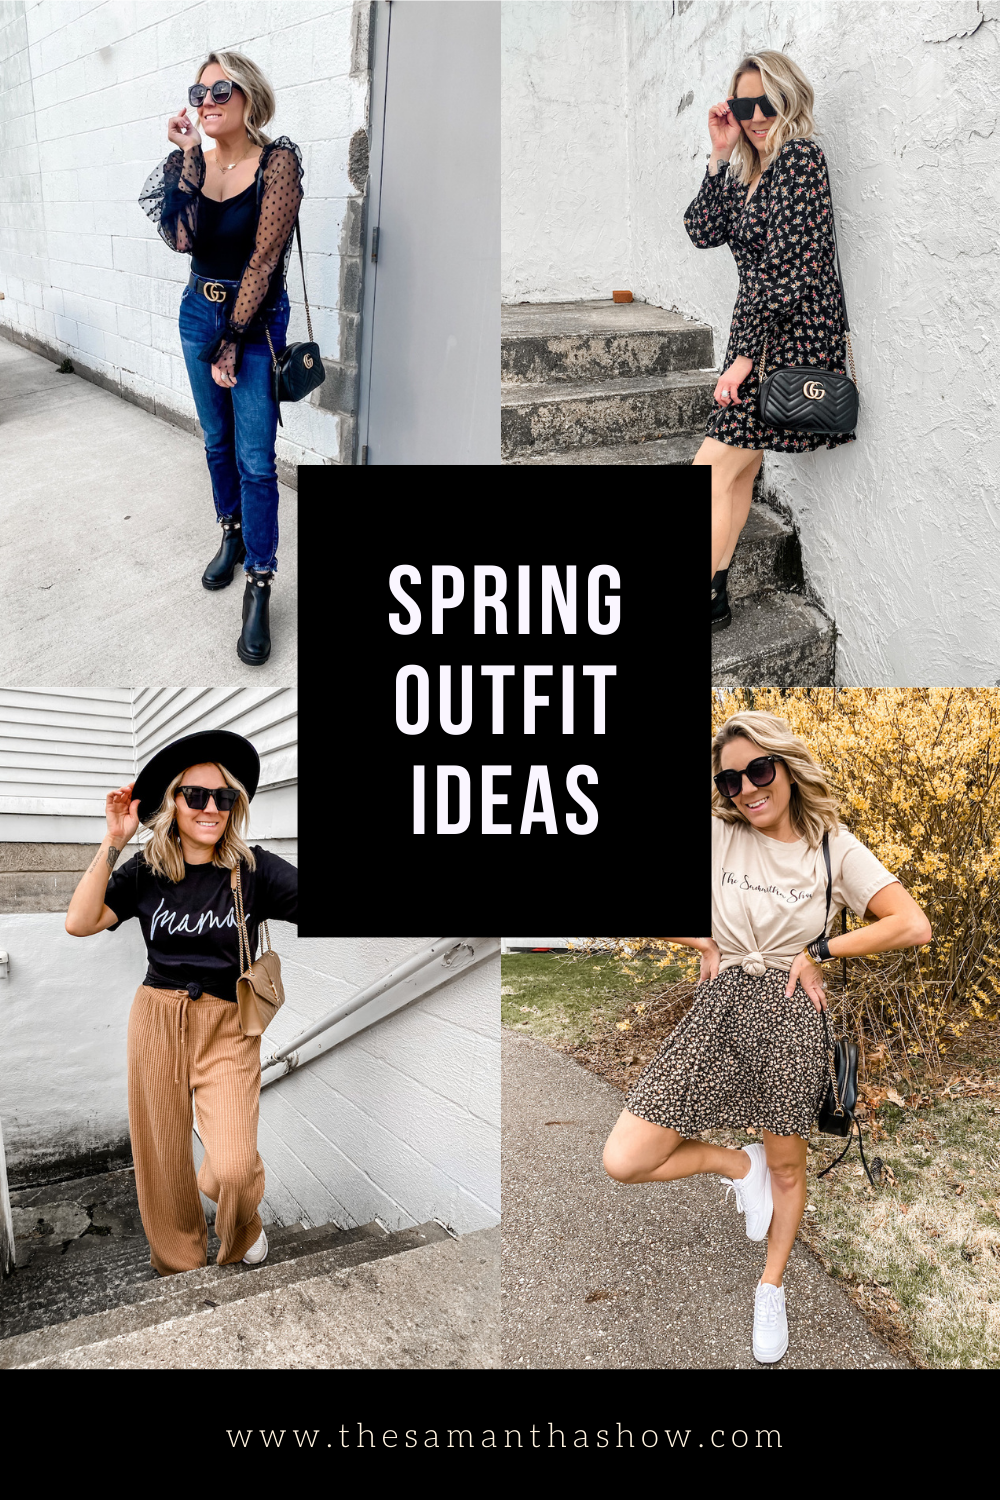 Spring Outfit Ideas - The Samantha Show- A Cleveland Life + Style Blog